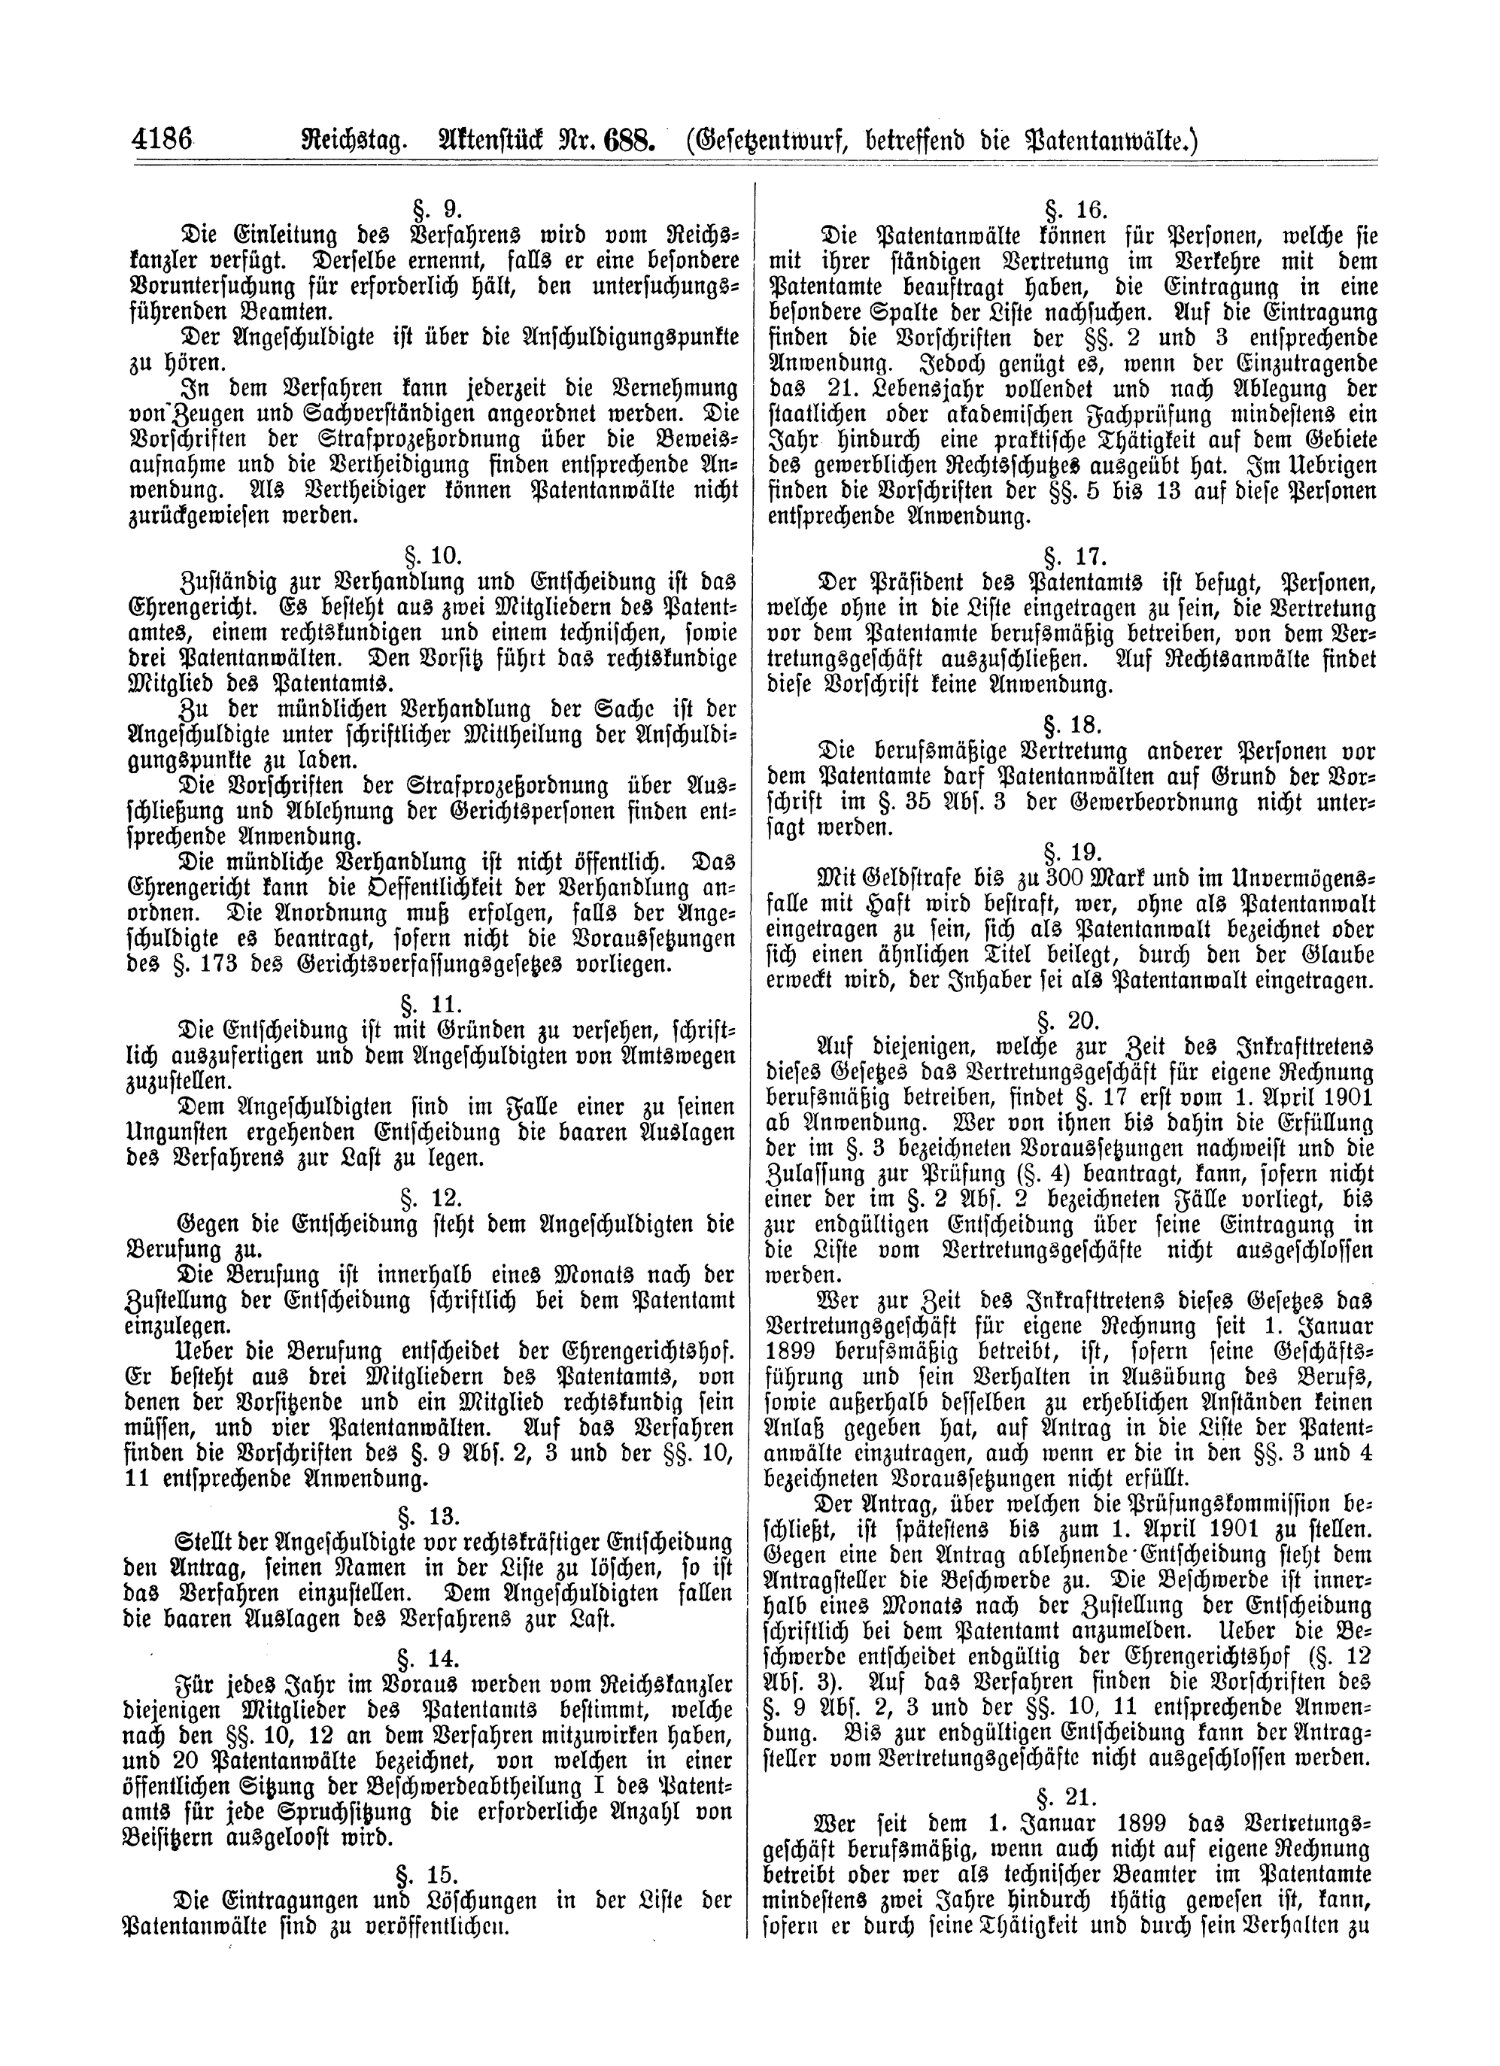 Scan of page 4186